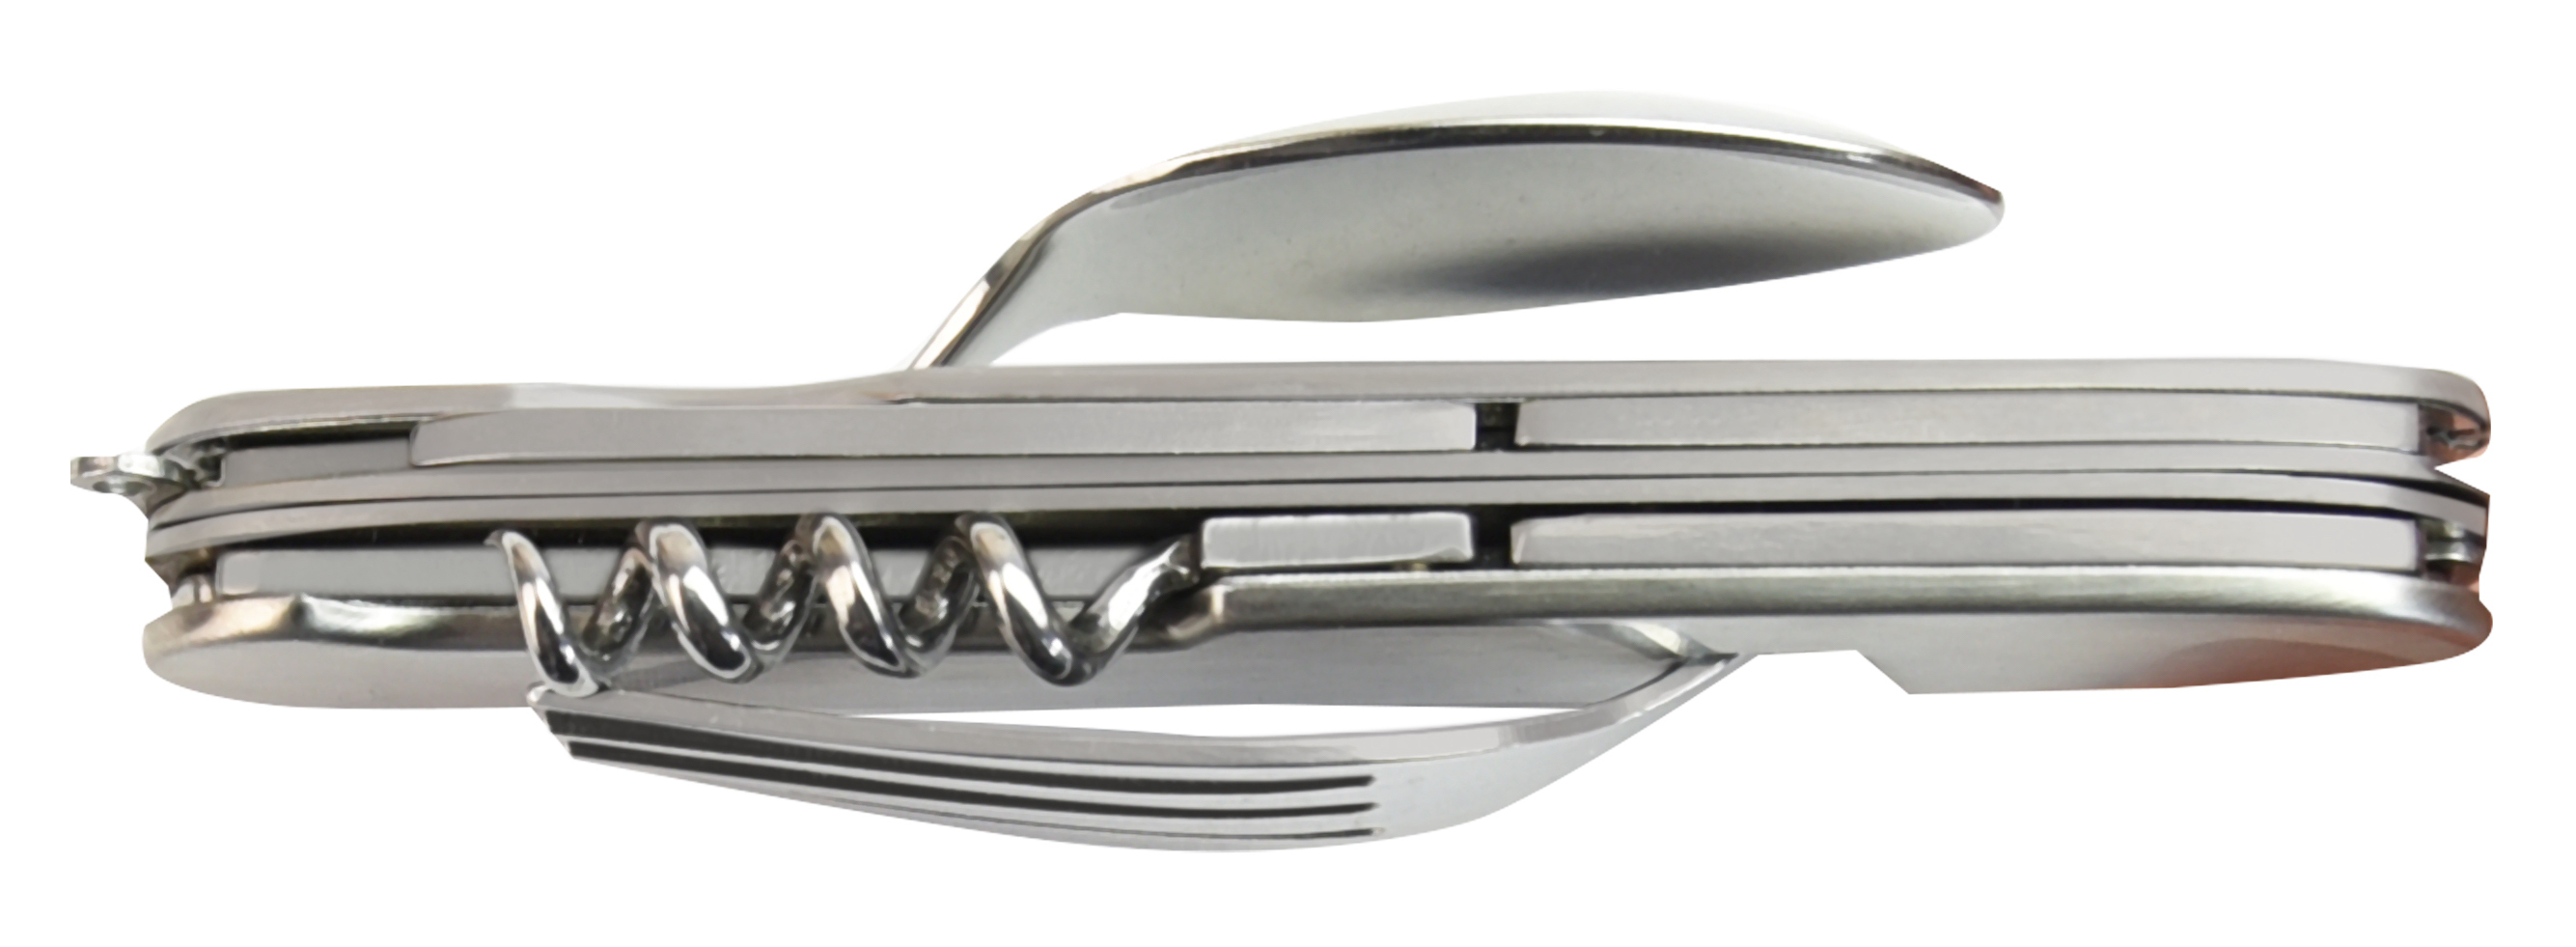 Excellent stainless steel camping cutlery